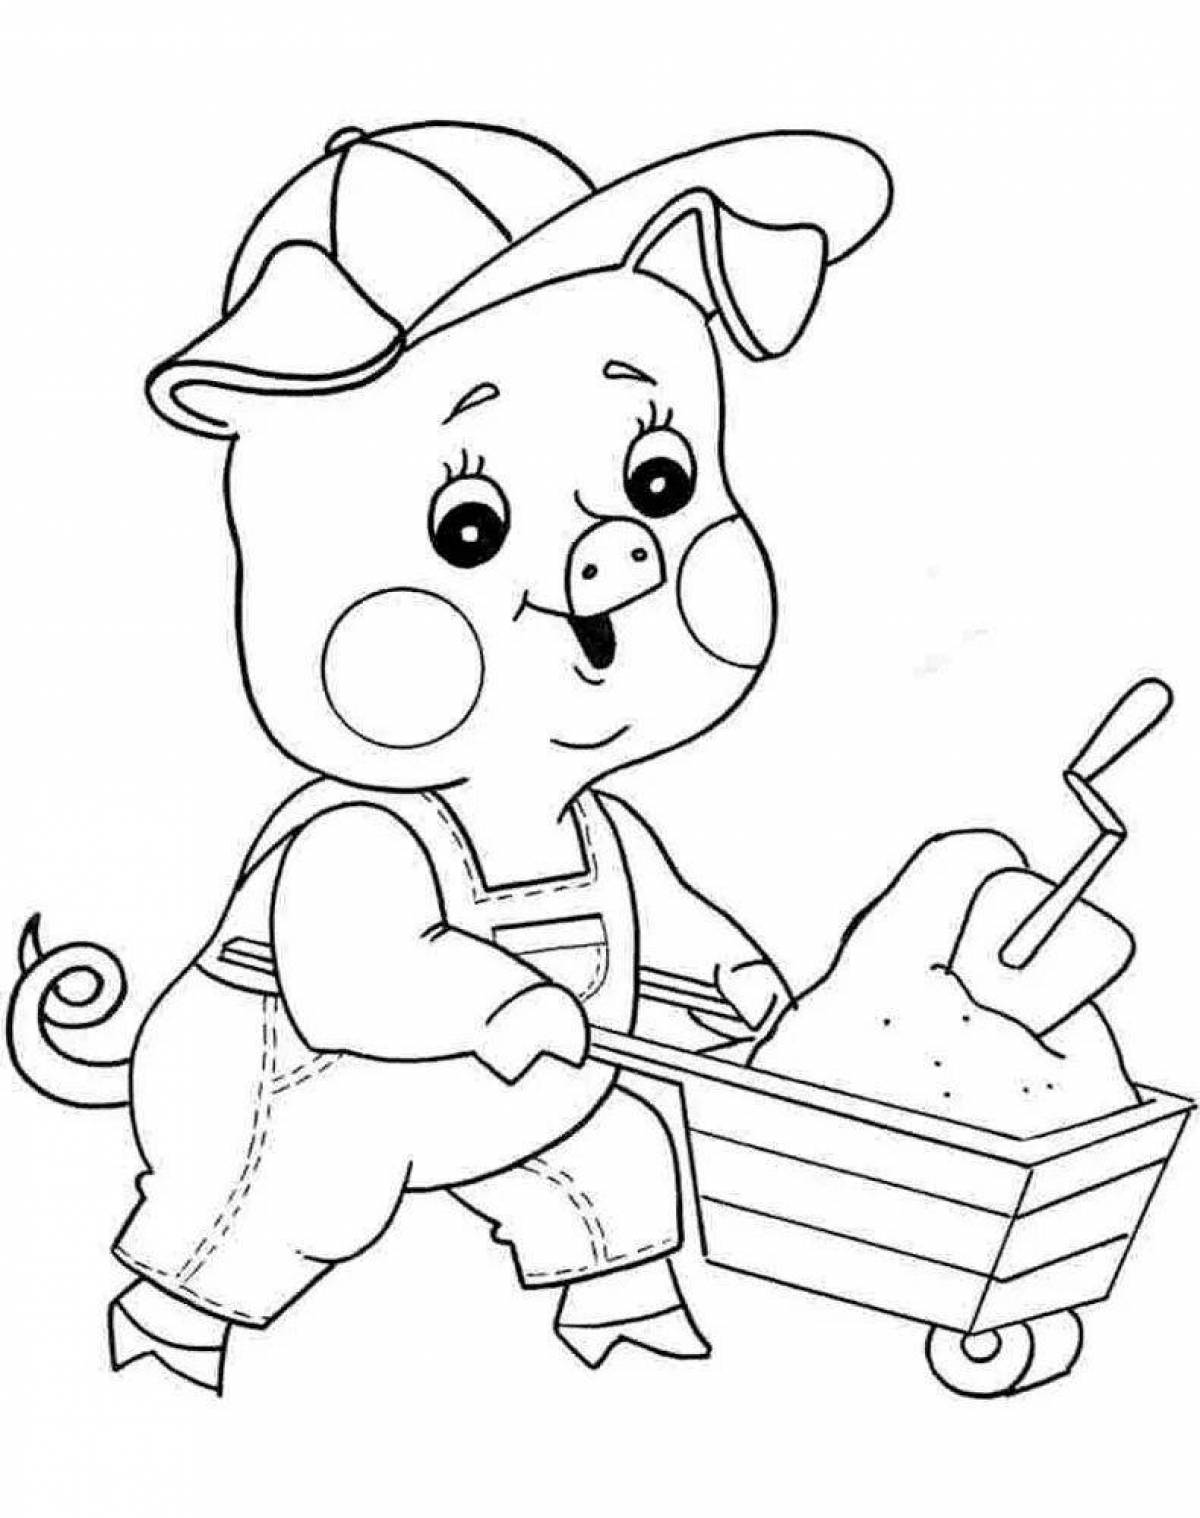 Coloring book the splendid tale of the three little pigs